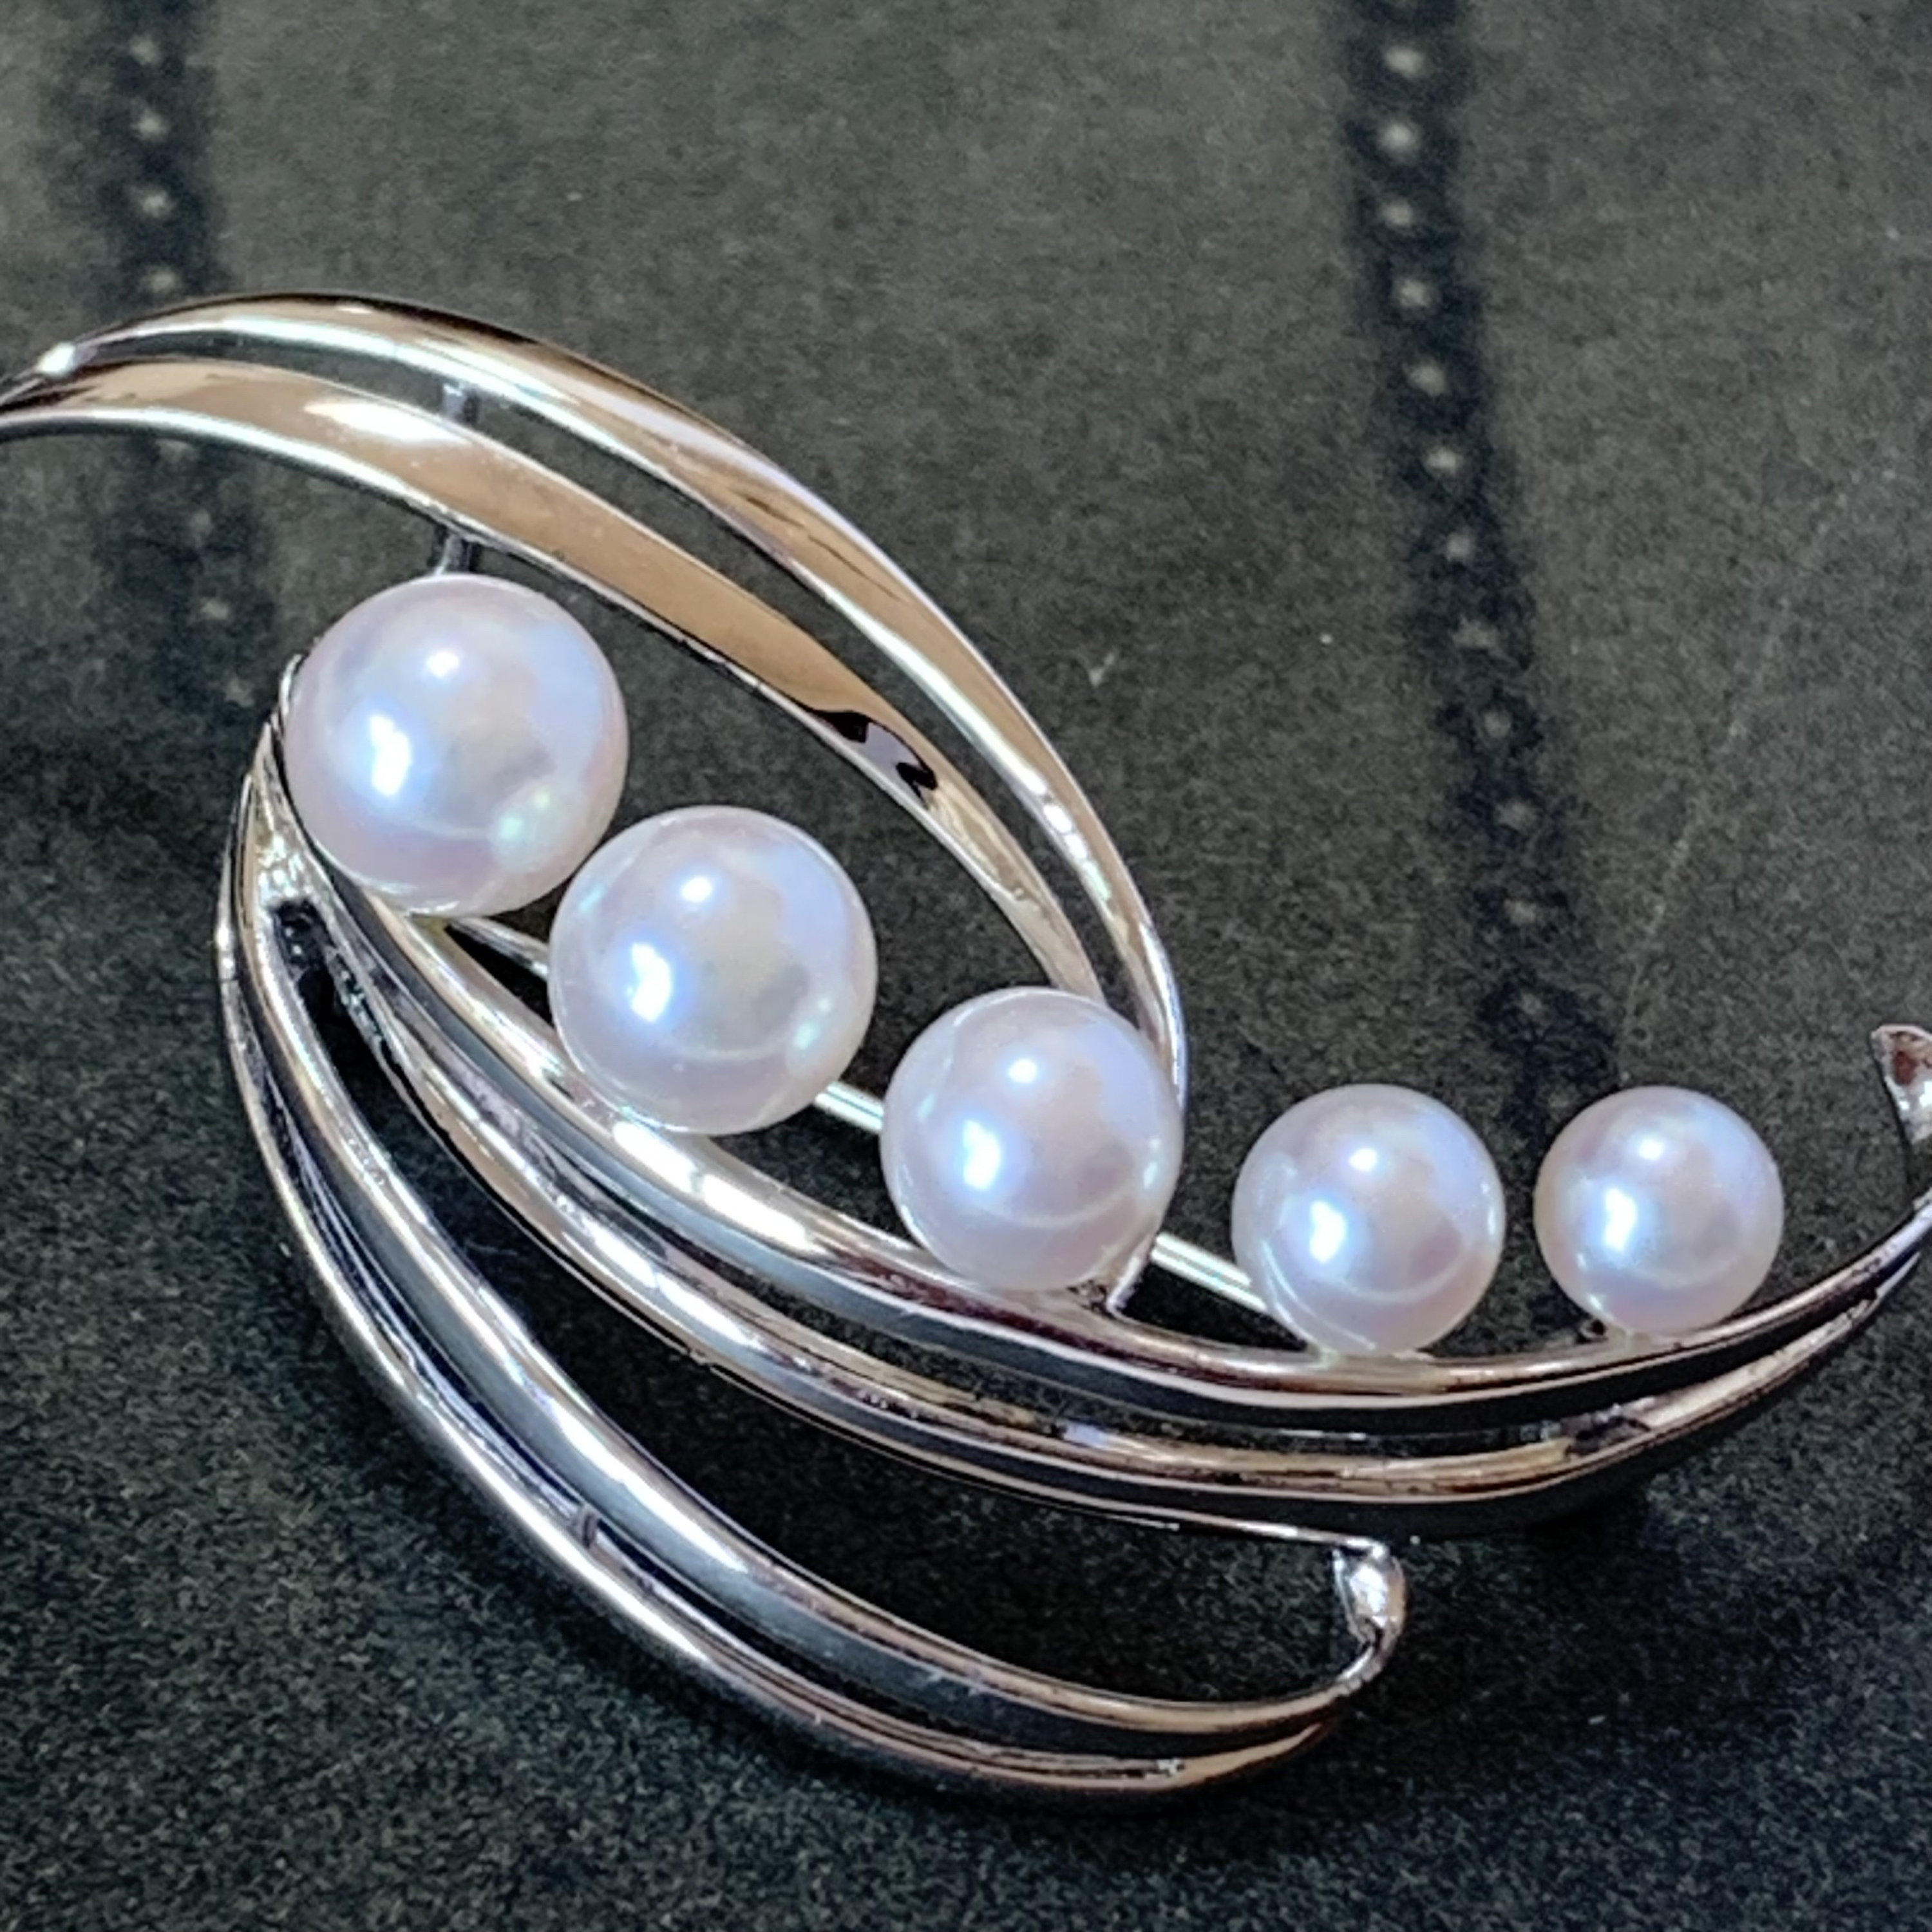 Vintage Mikimoto Pearl Brooch. Silver Ribbon Design With Five Graduated Akoya Pearls